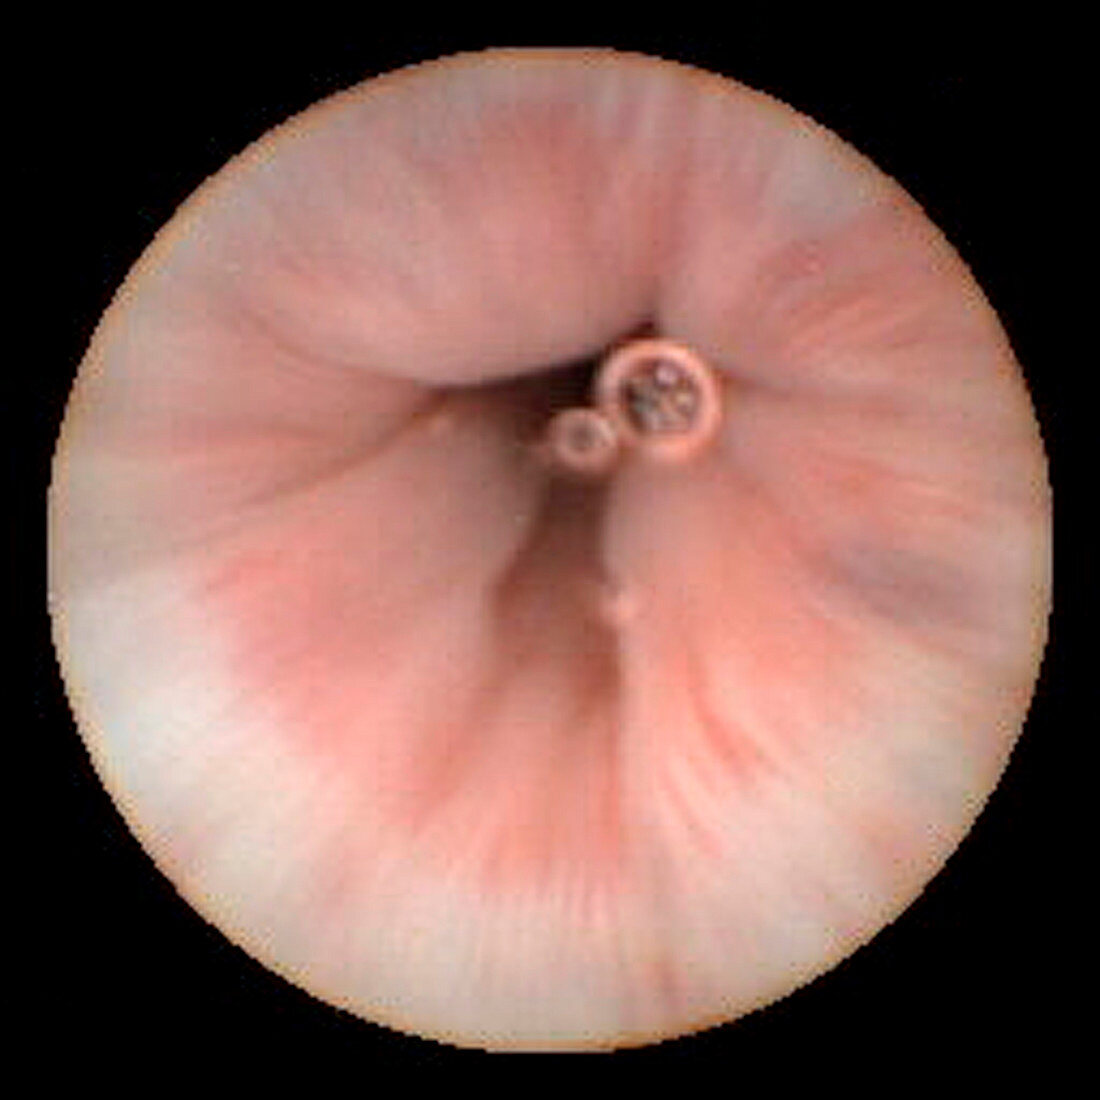 Healthy oesophagus,pill camera view